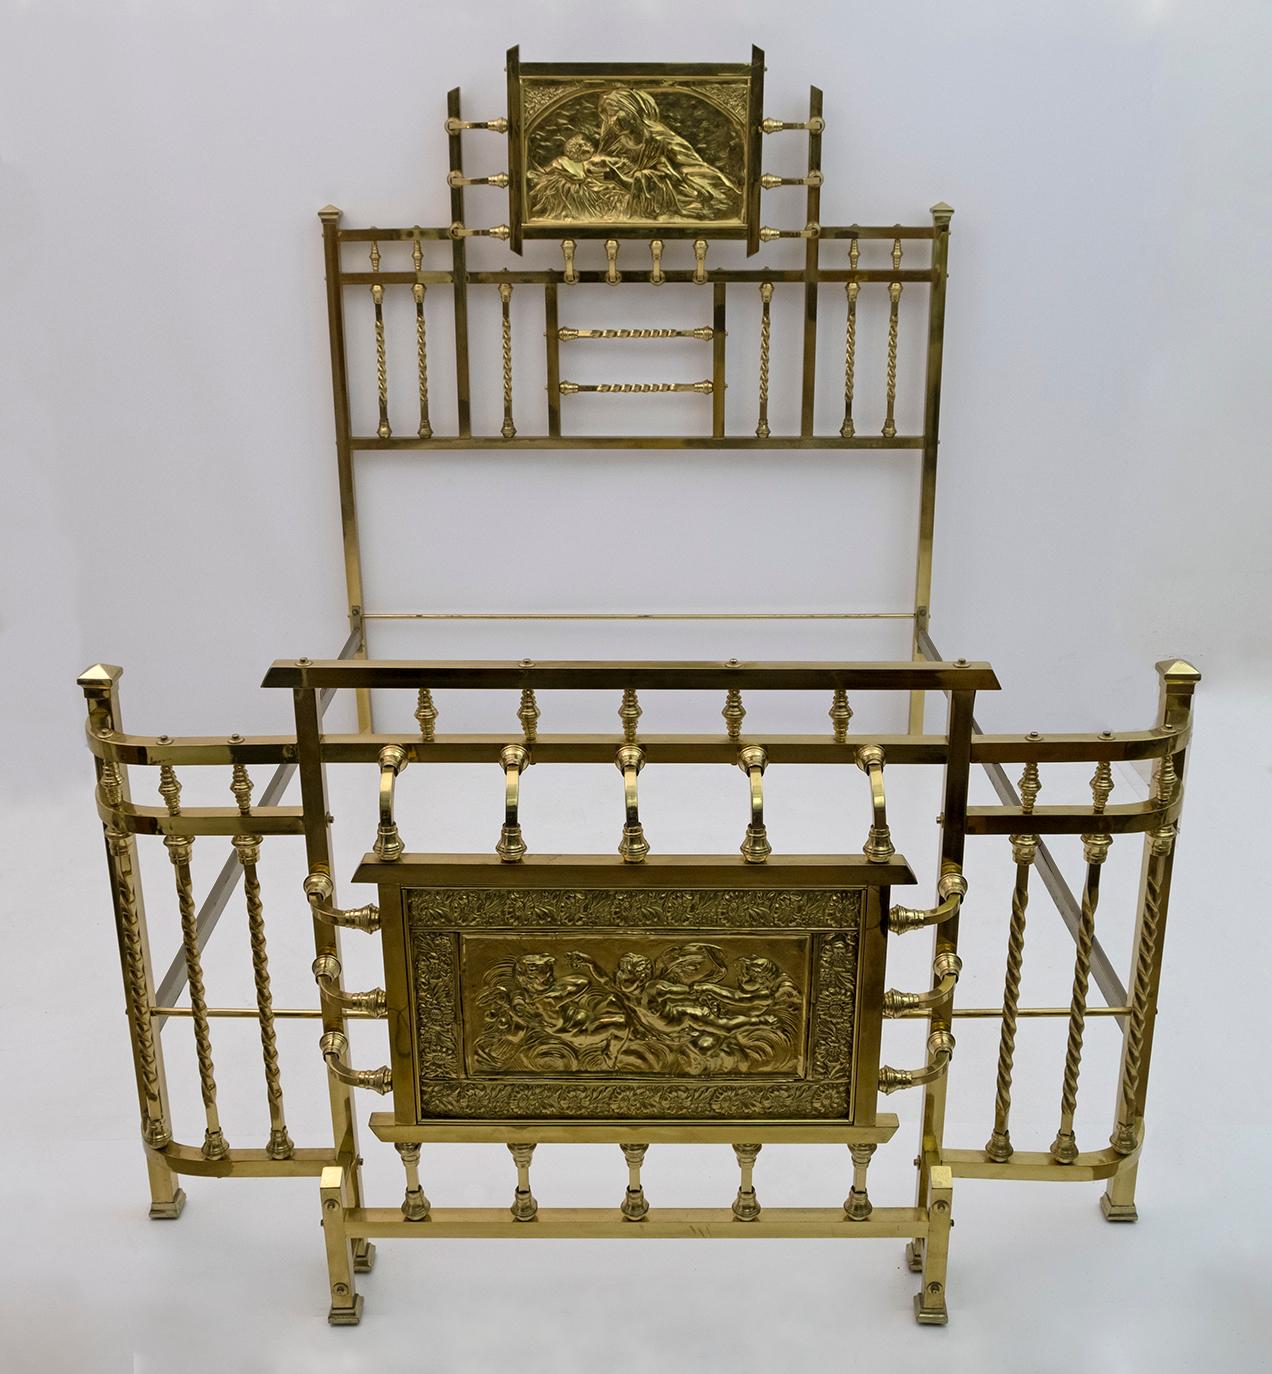 Large Italian double bed from the early 20th century. Fabulous quality object and gilded brass decoration. Bed decorated with plaques depicting female characters and neoclassical cherubs, in the style of French Art Nouveau or Italian Liberty, (see